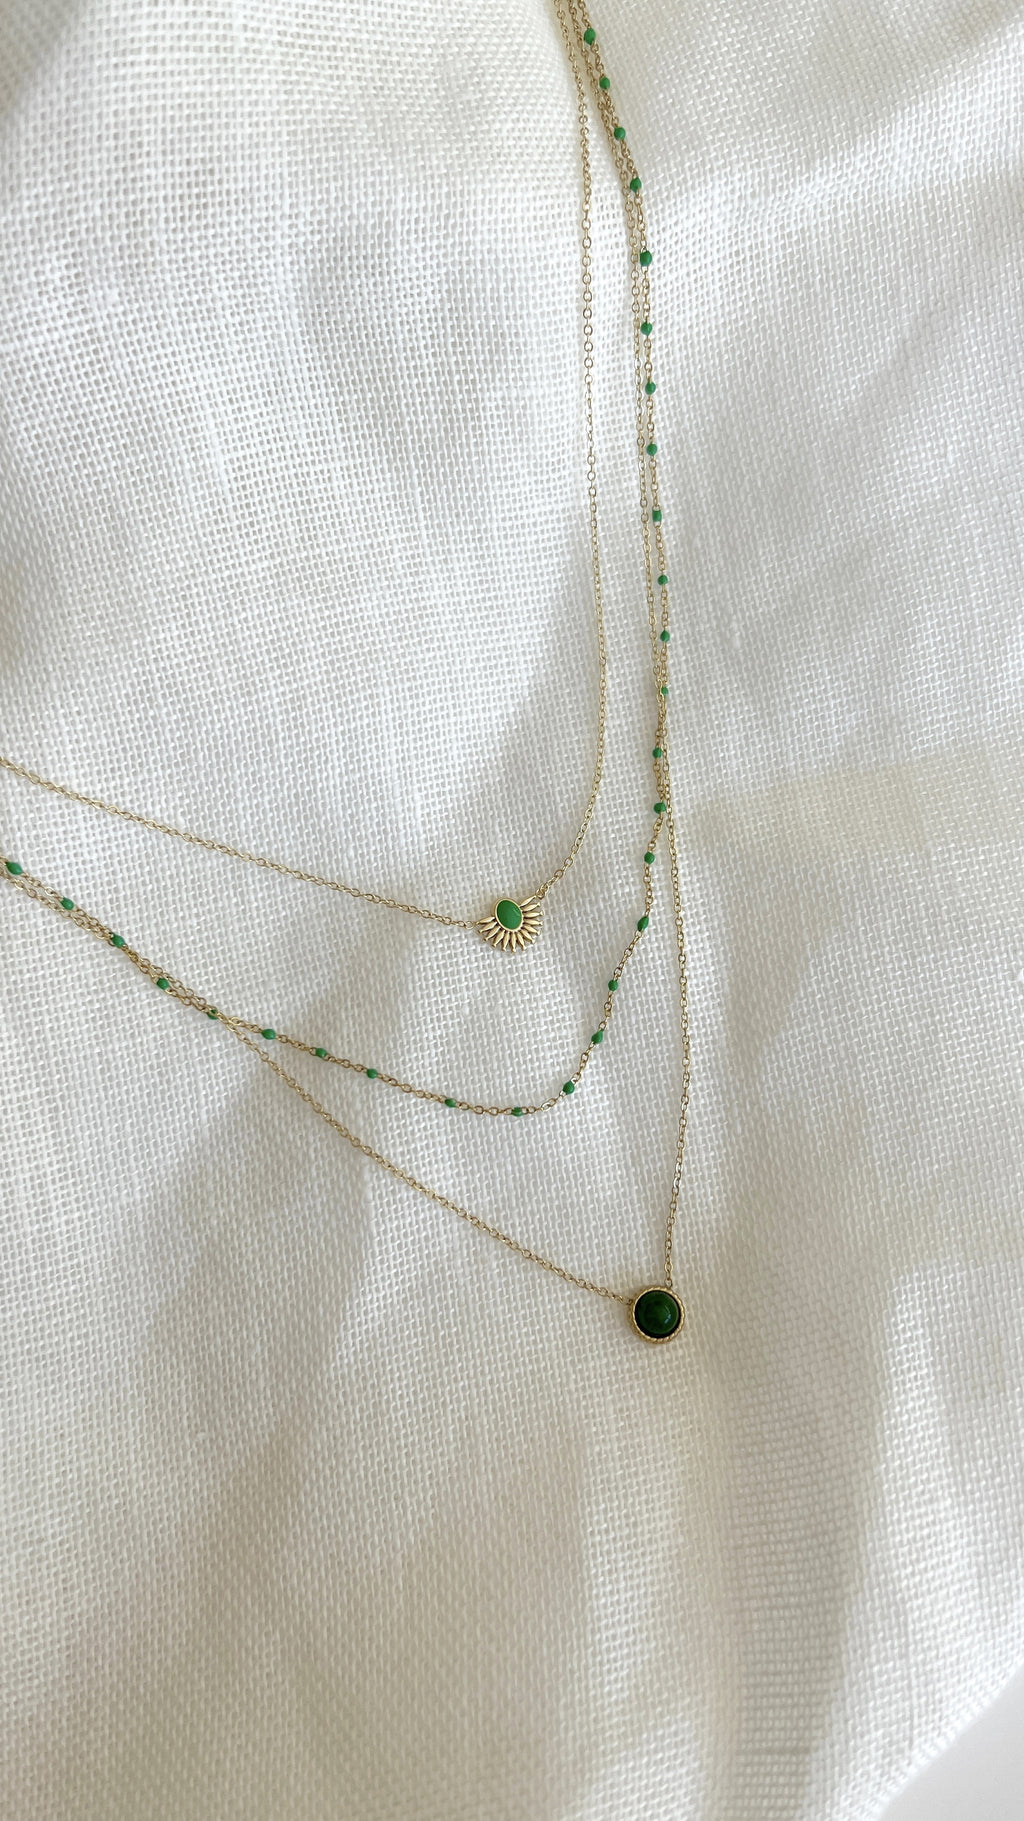 Nyla necklace - green and Golden